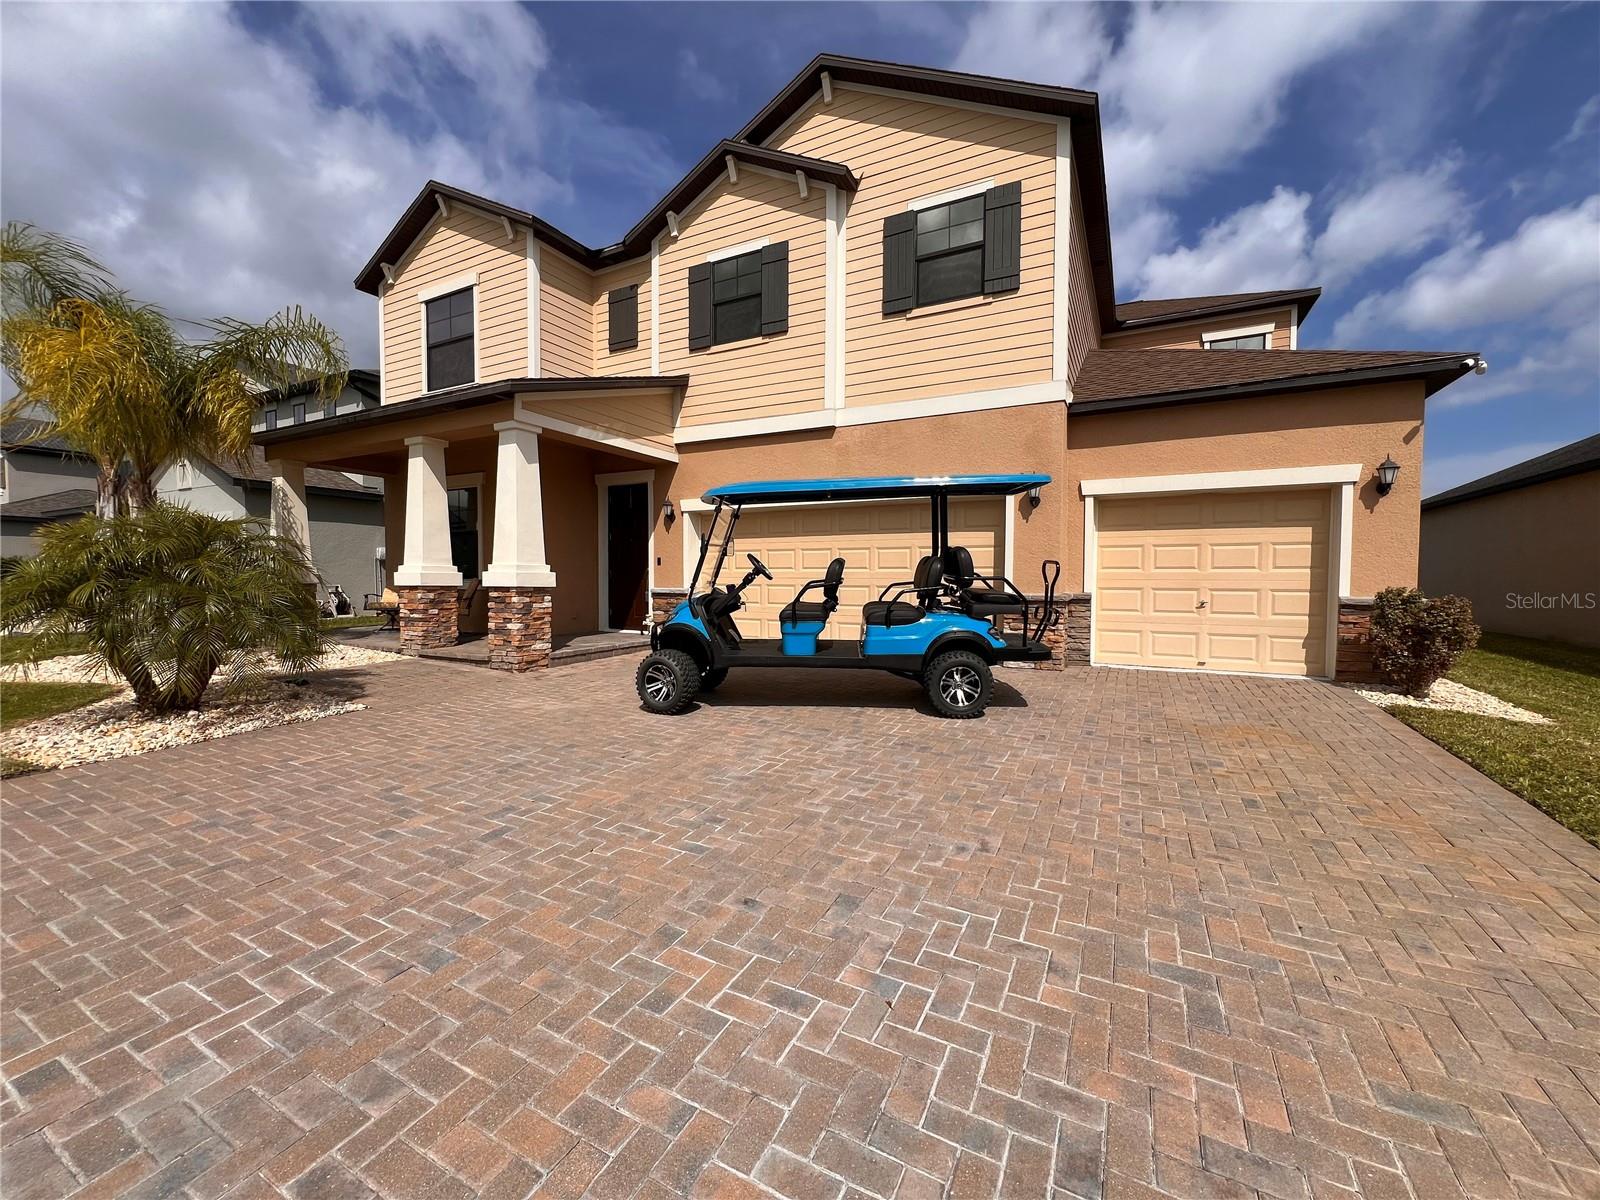 GOLF CART Included with the home